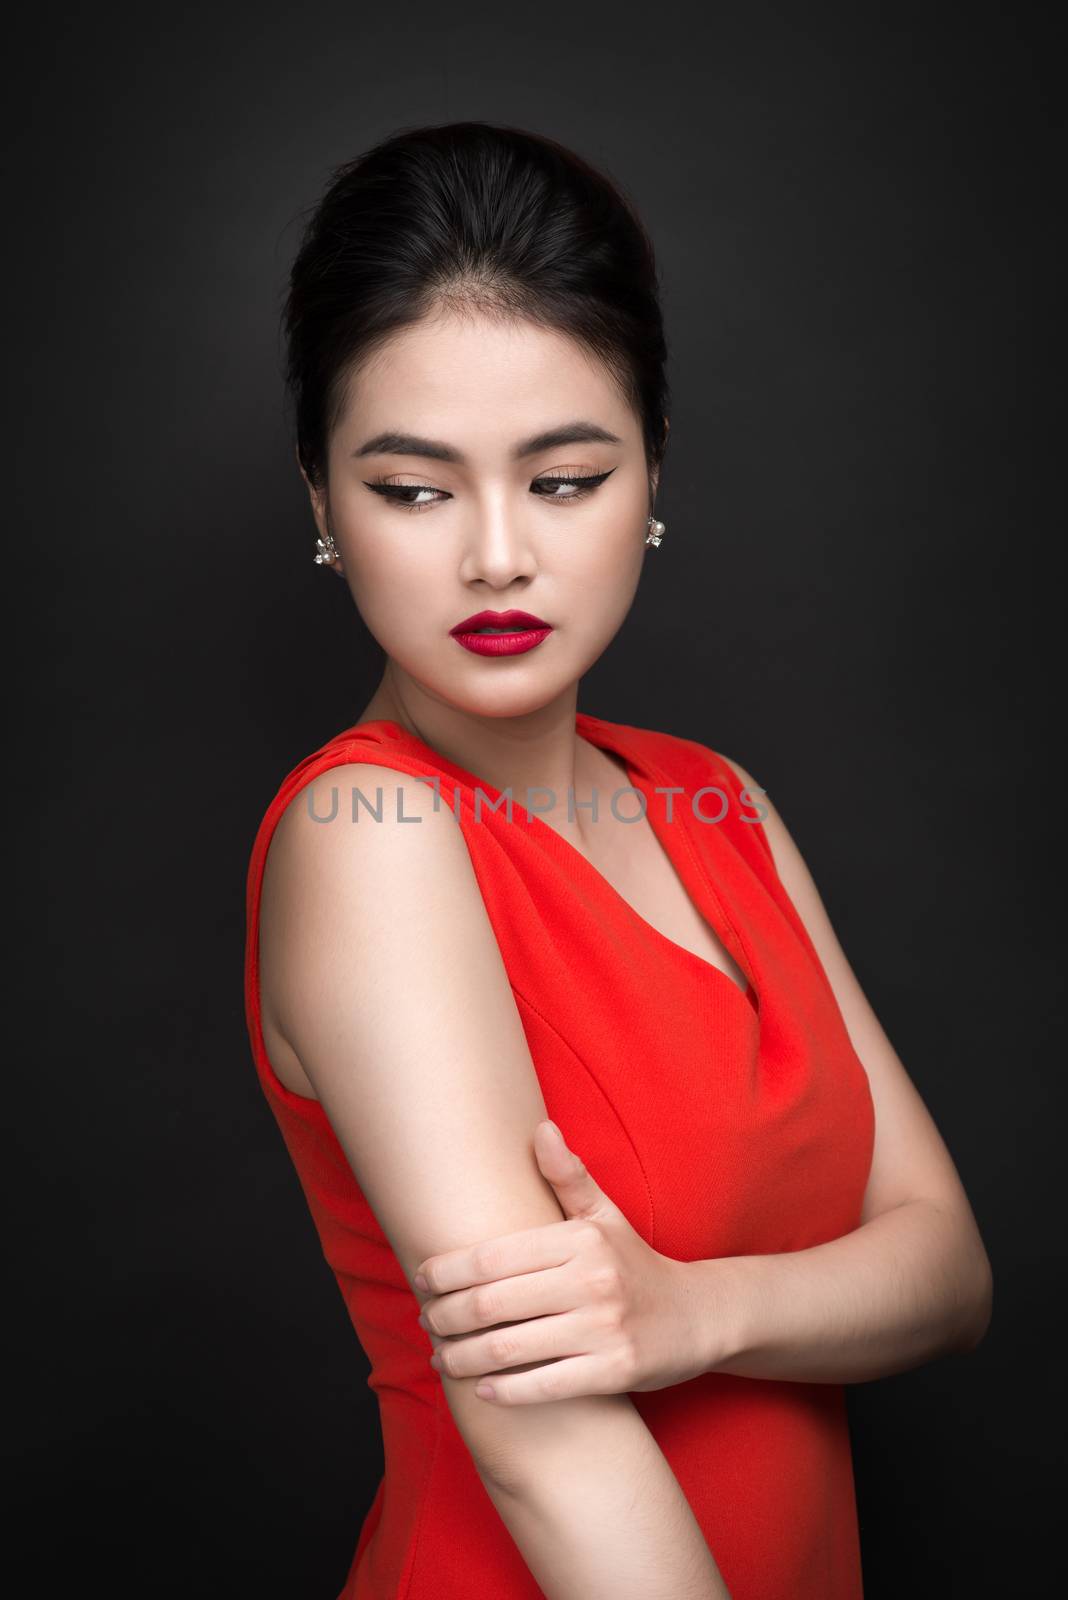 Closeup of beautiful sexy girl with bright makeup and red lips. Beauty fashion asian woman.